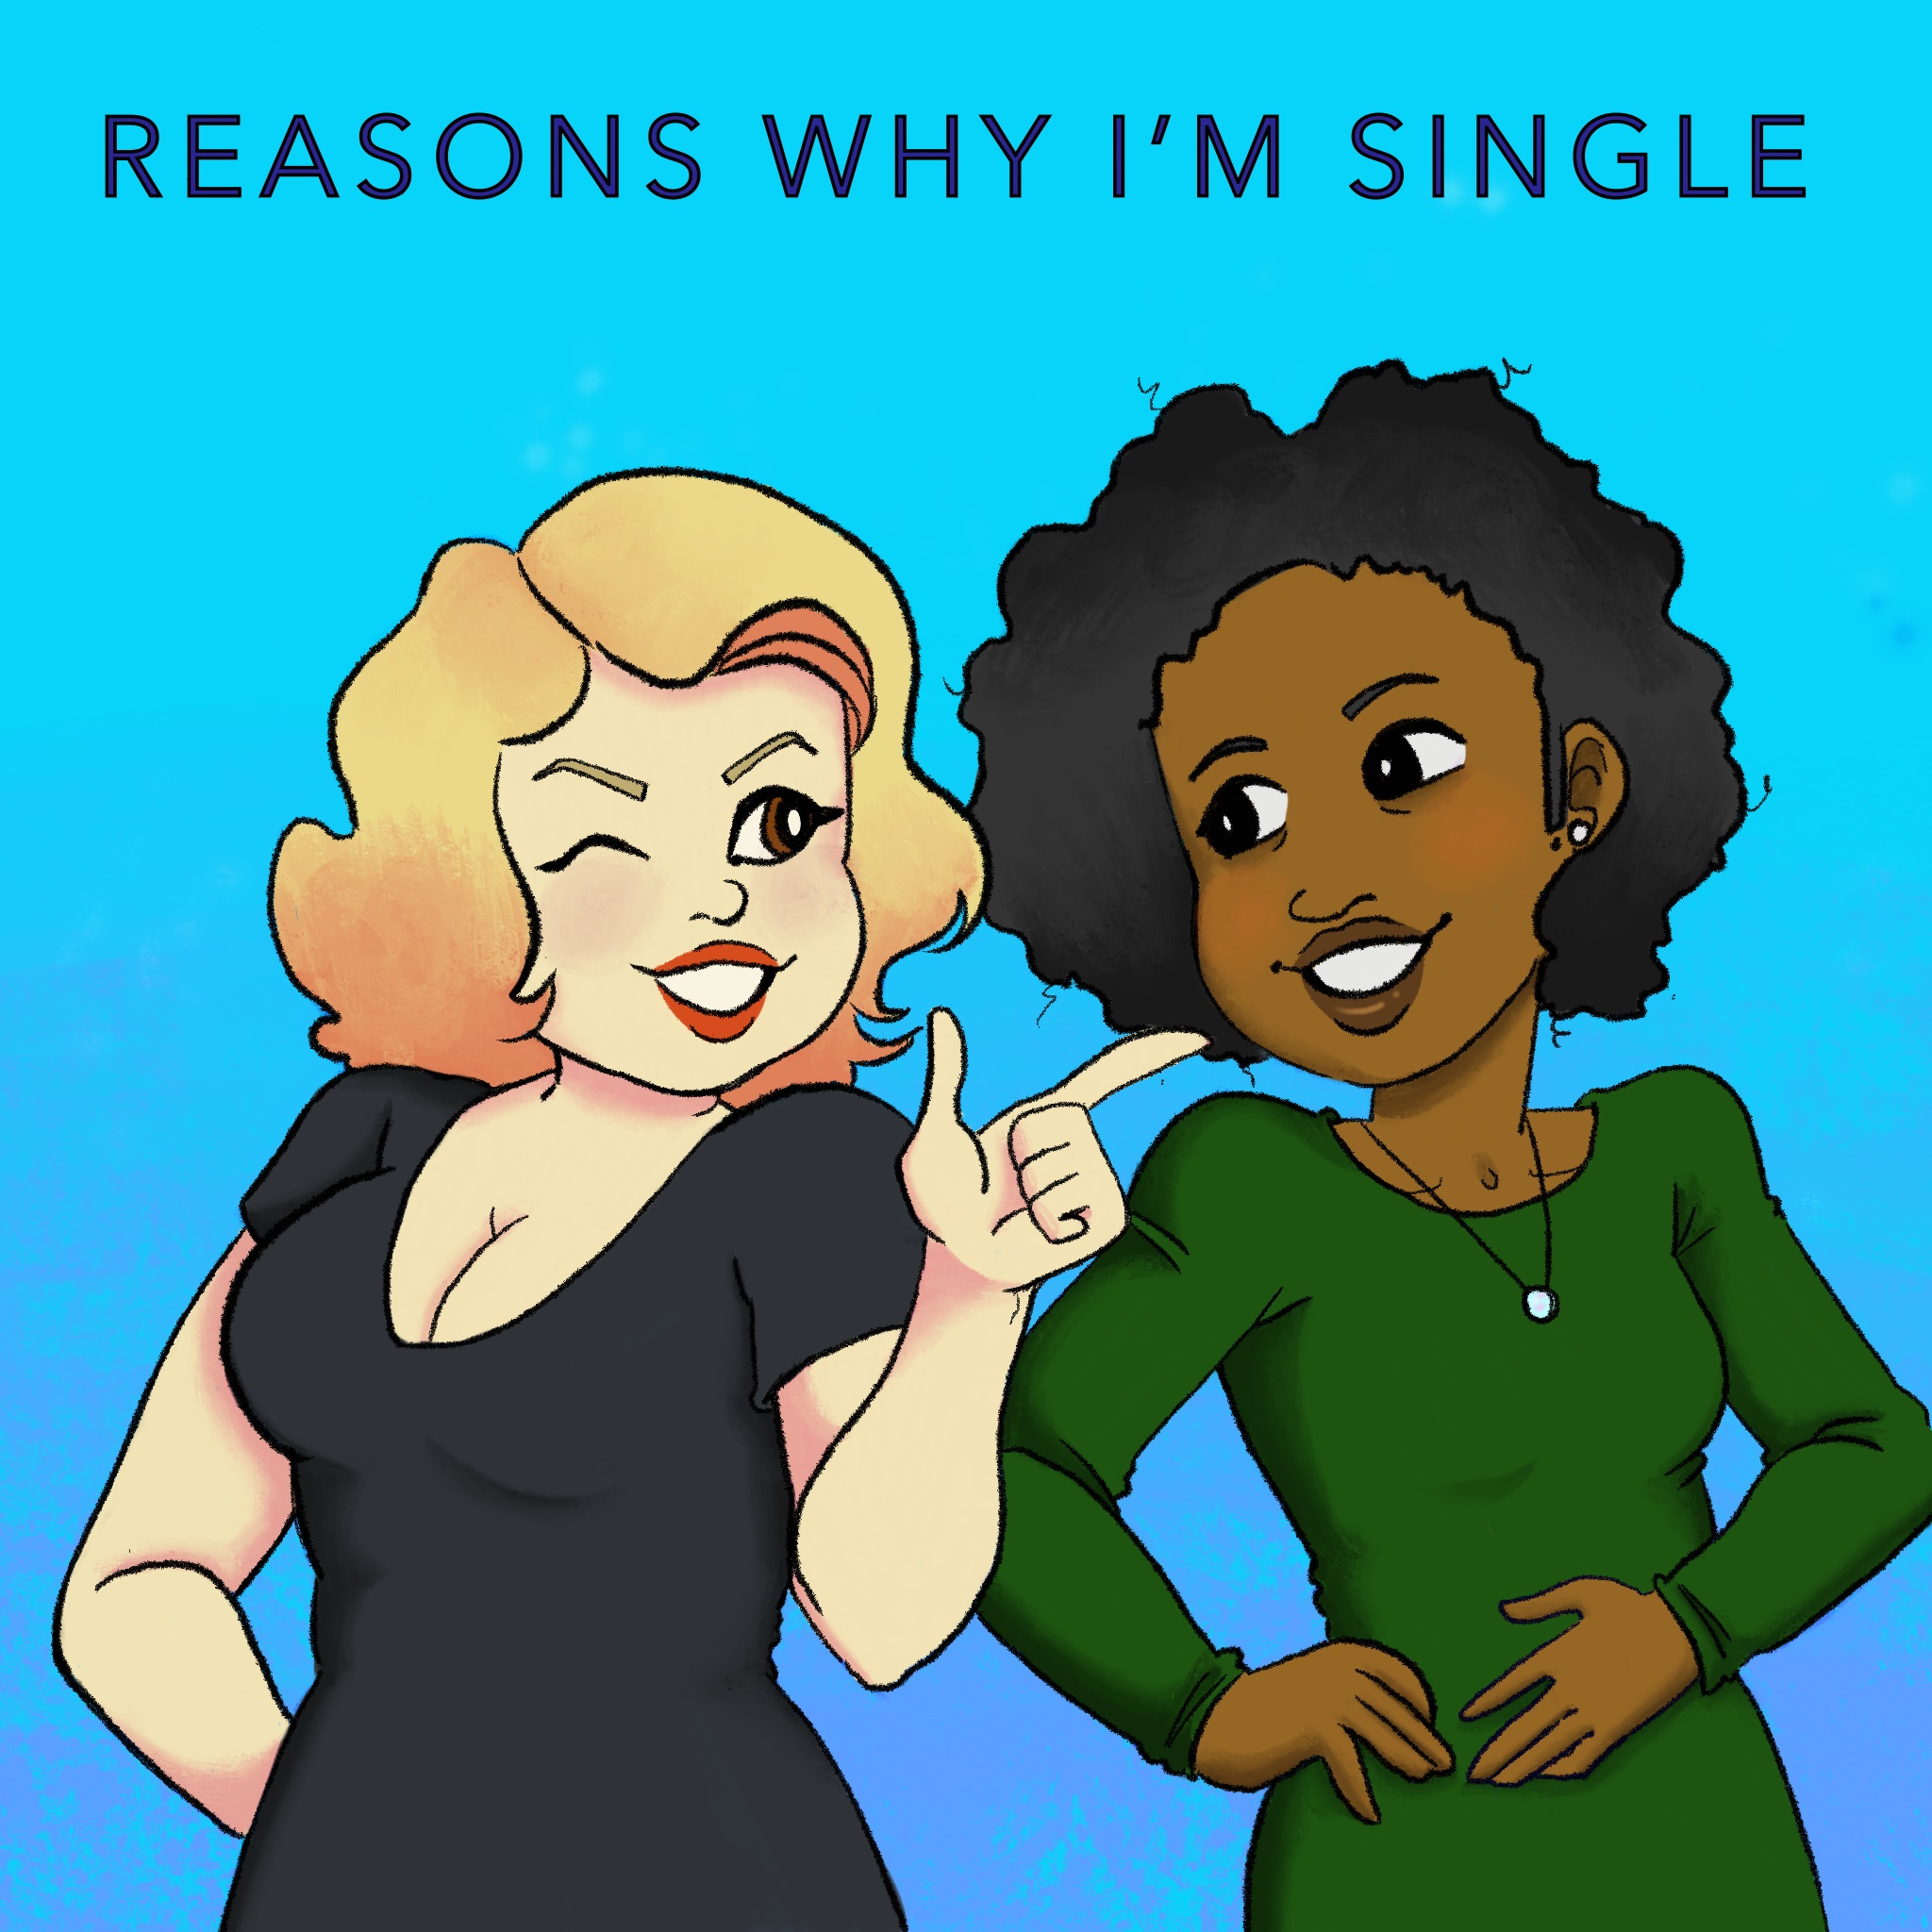 Reasons Why I’m Single – Episode 186 Titty Croissants